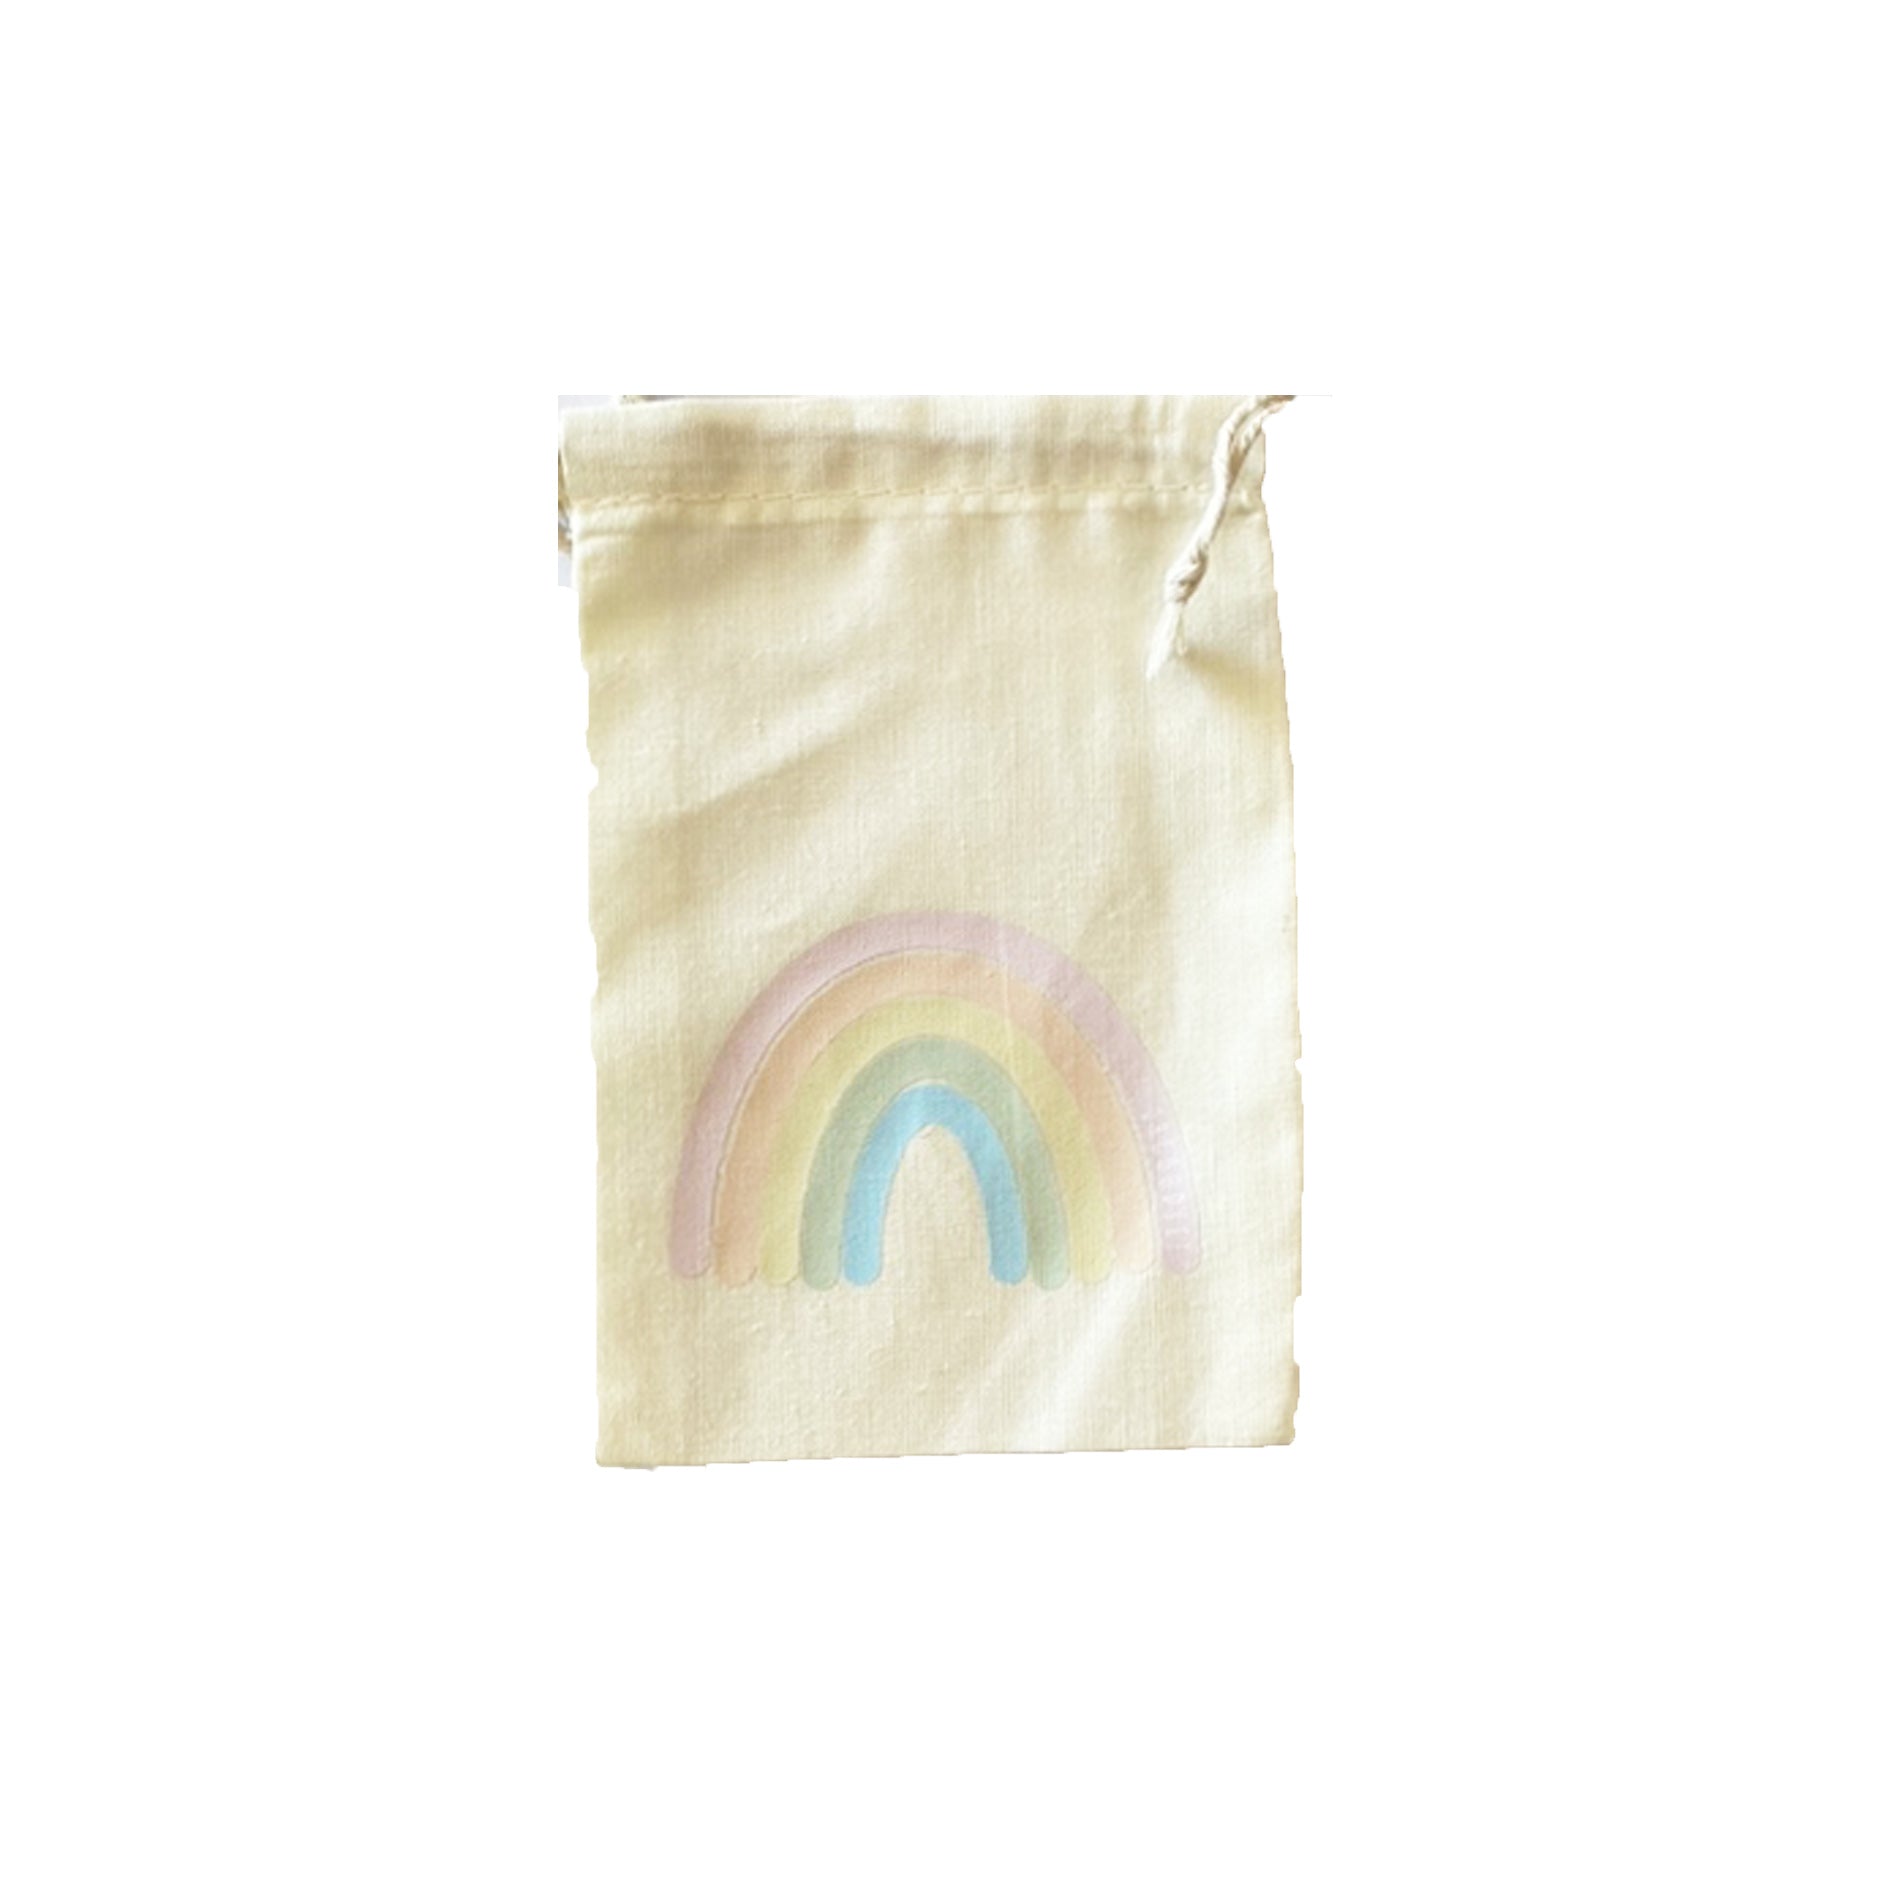 Calico Party Favour Bags - Pastel Rainbow | Online Party Supplies ...